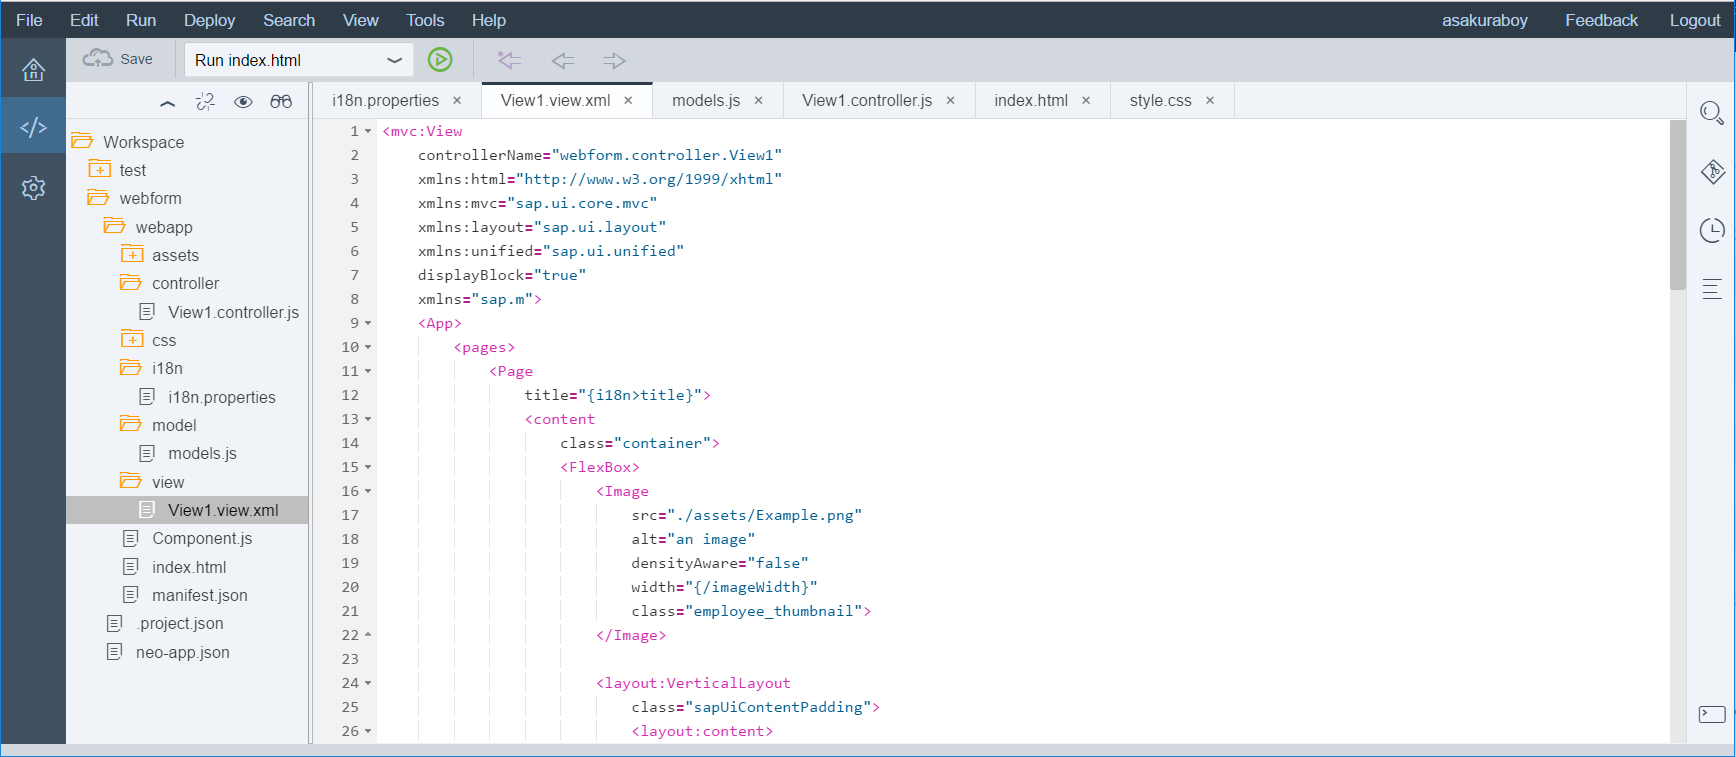 Screenshot of a local install of the SAP Web IDE dashboard